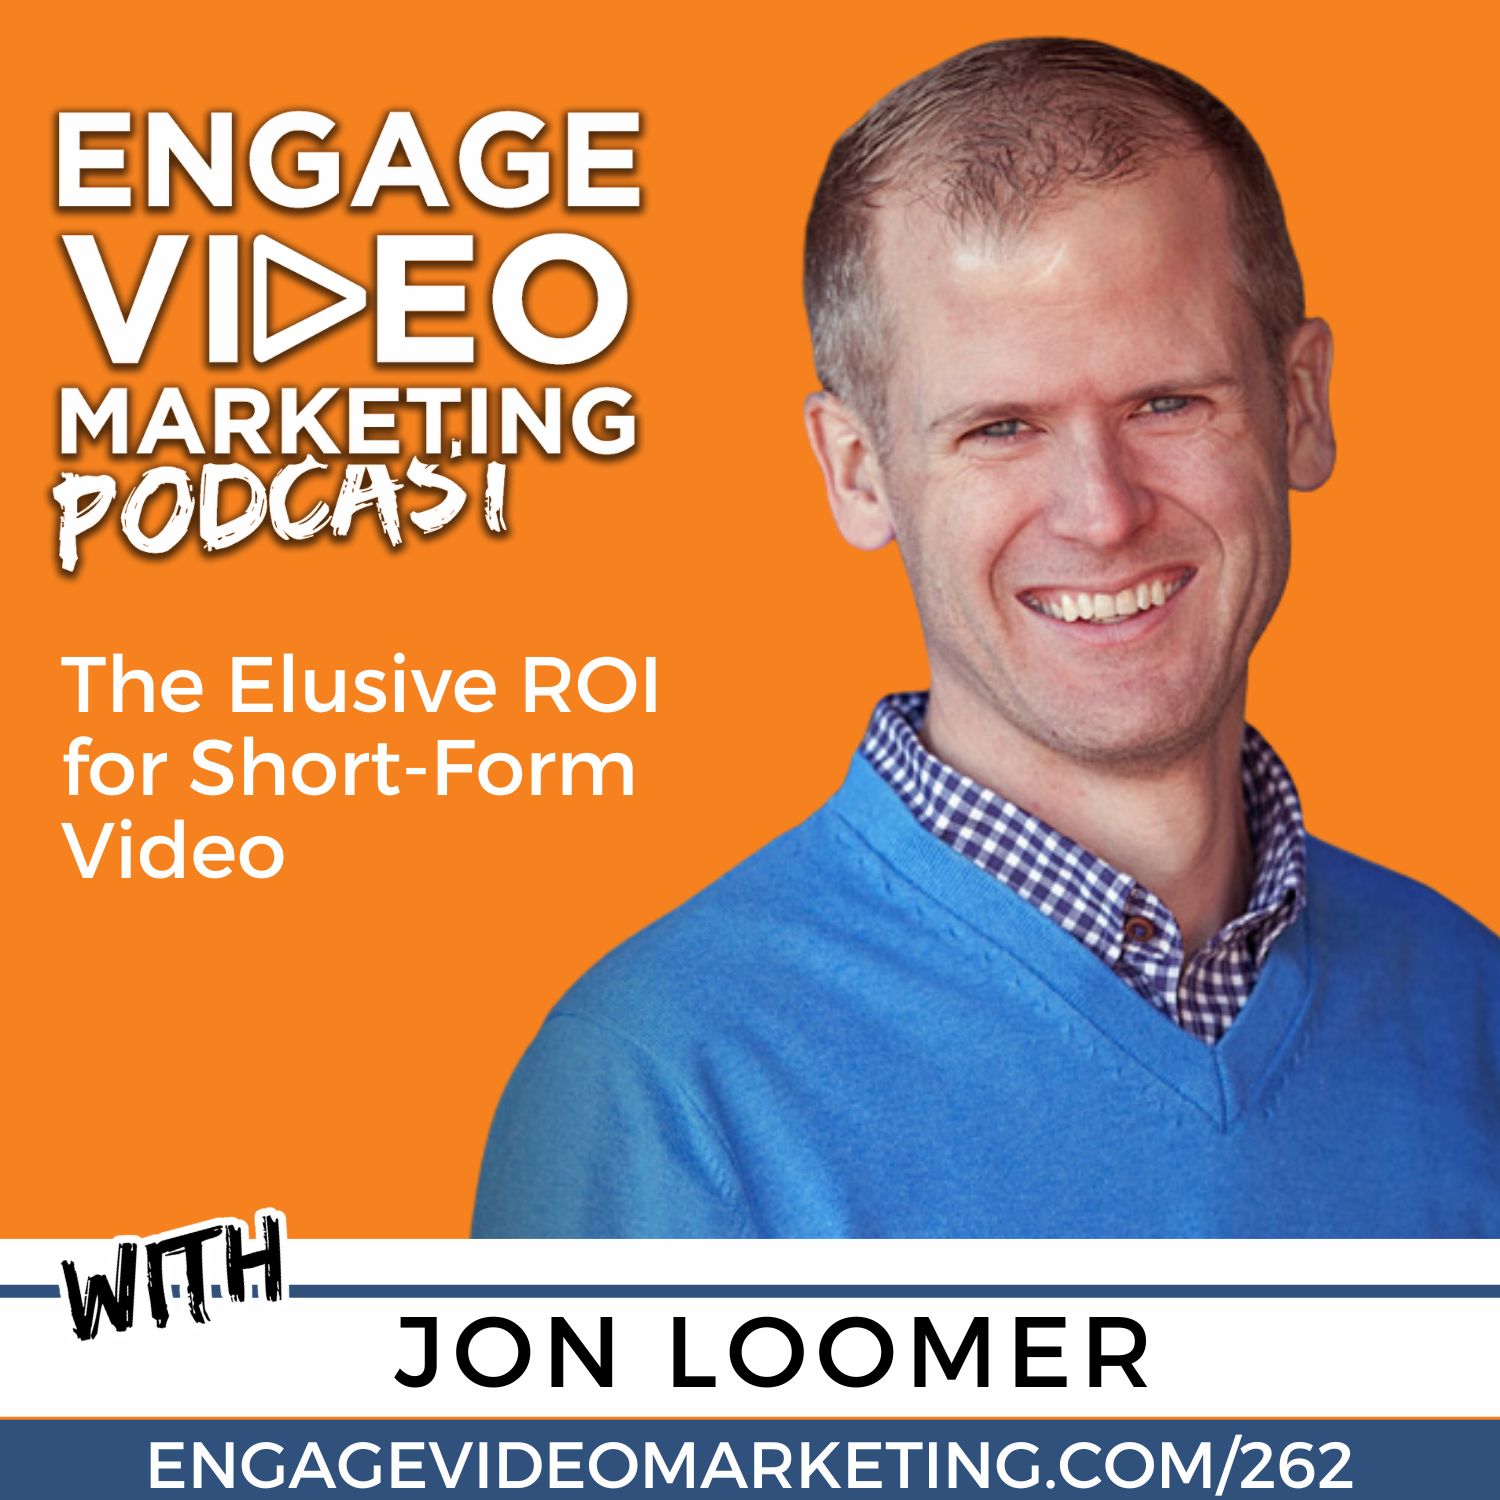 The Elusive ROI for Short-Form Video with Jon Loomer